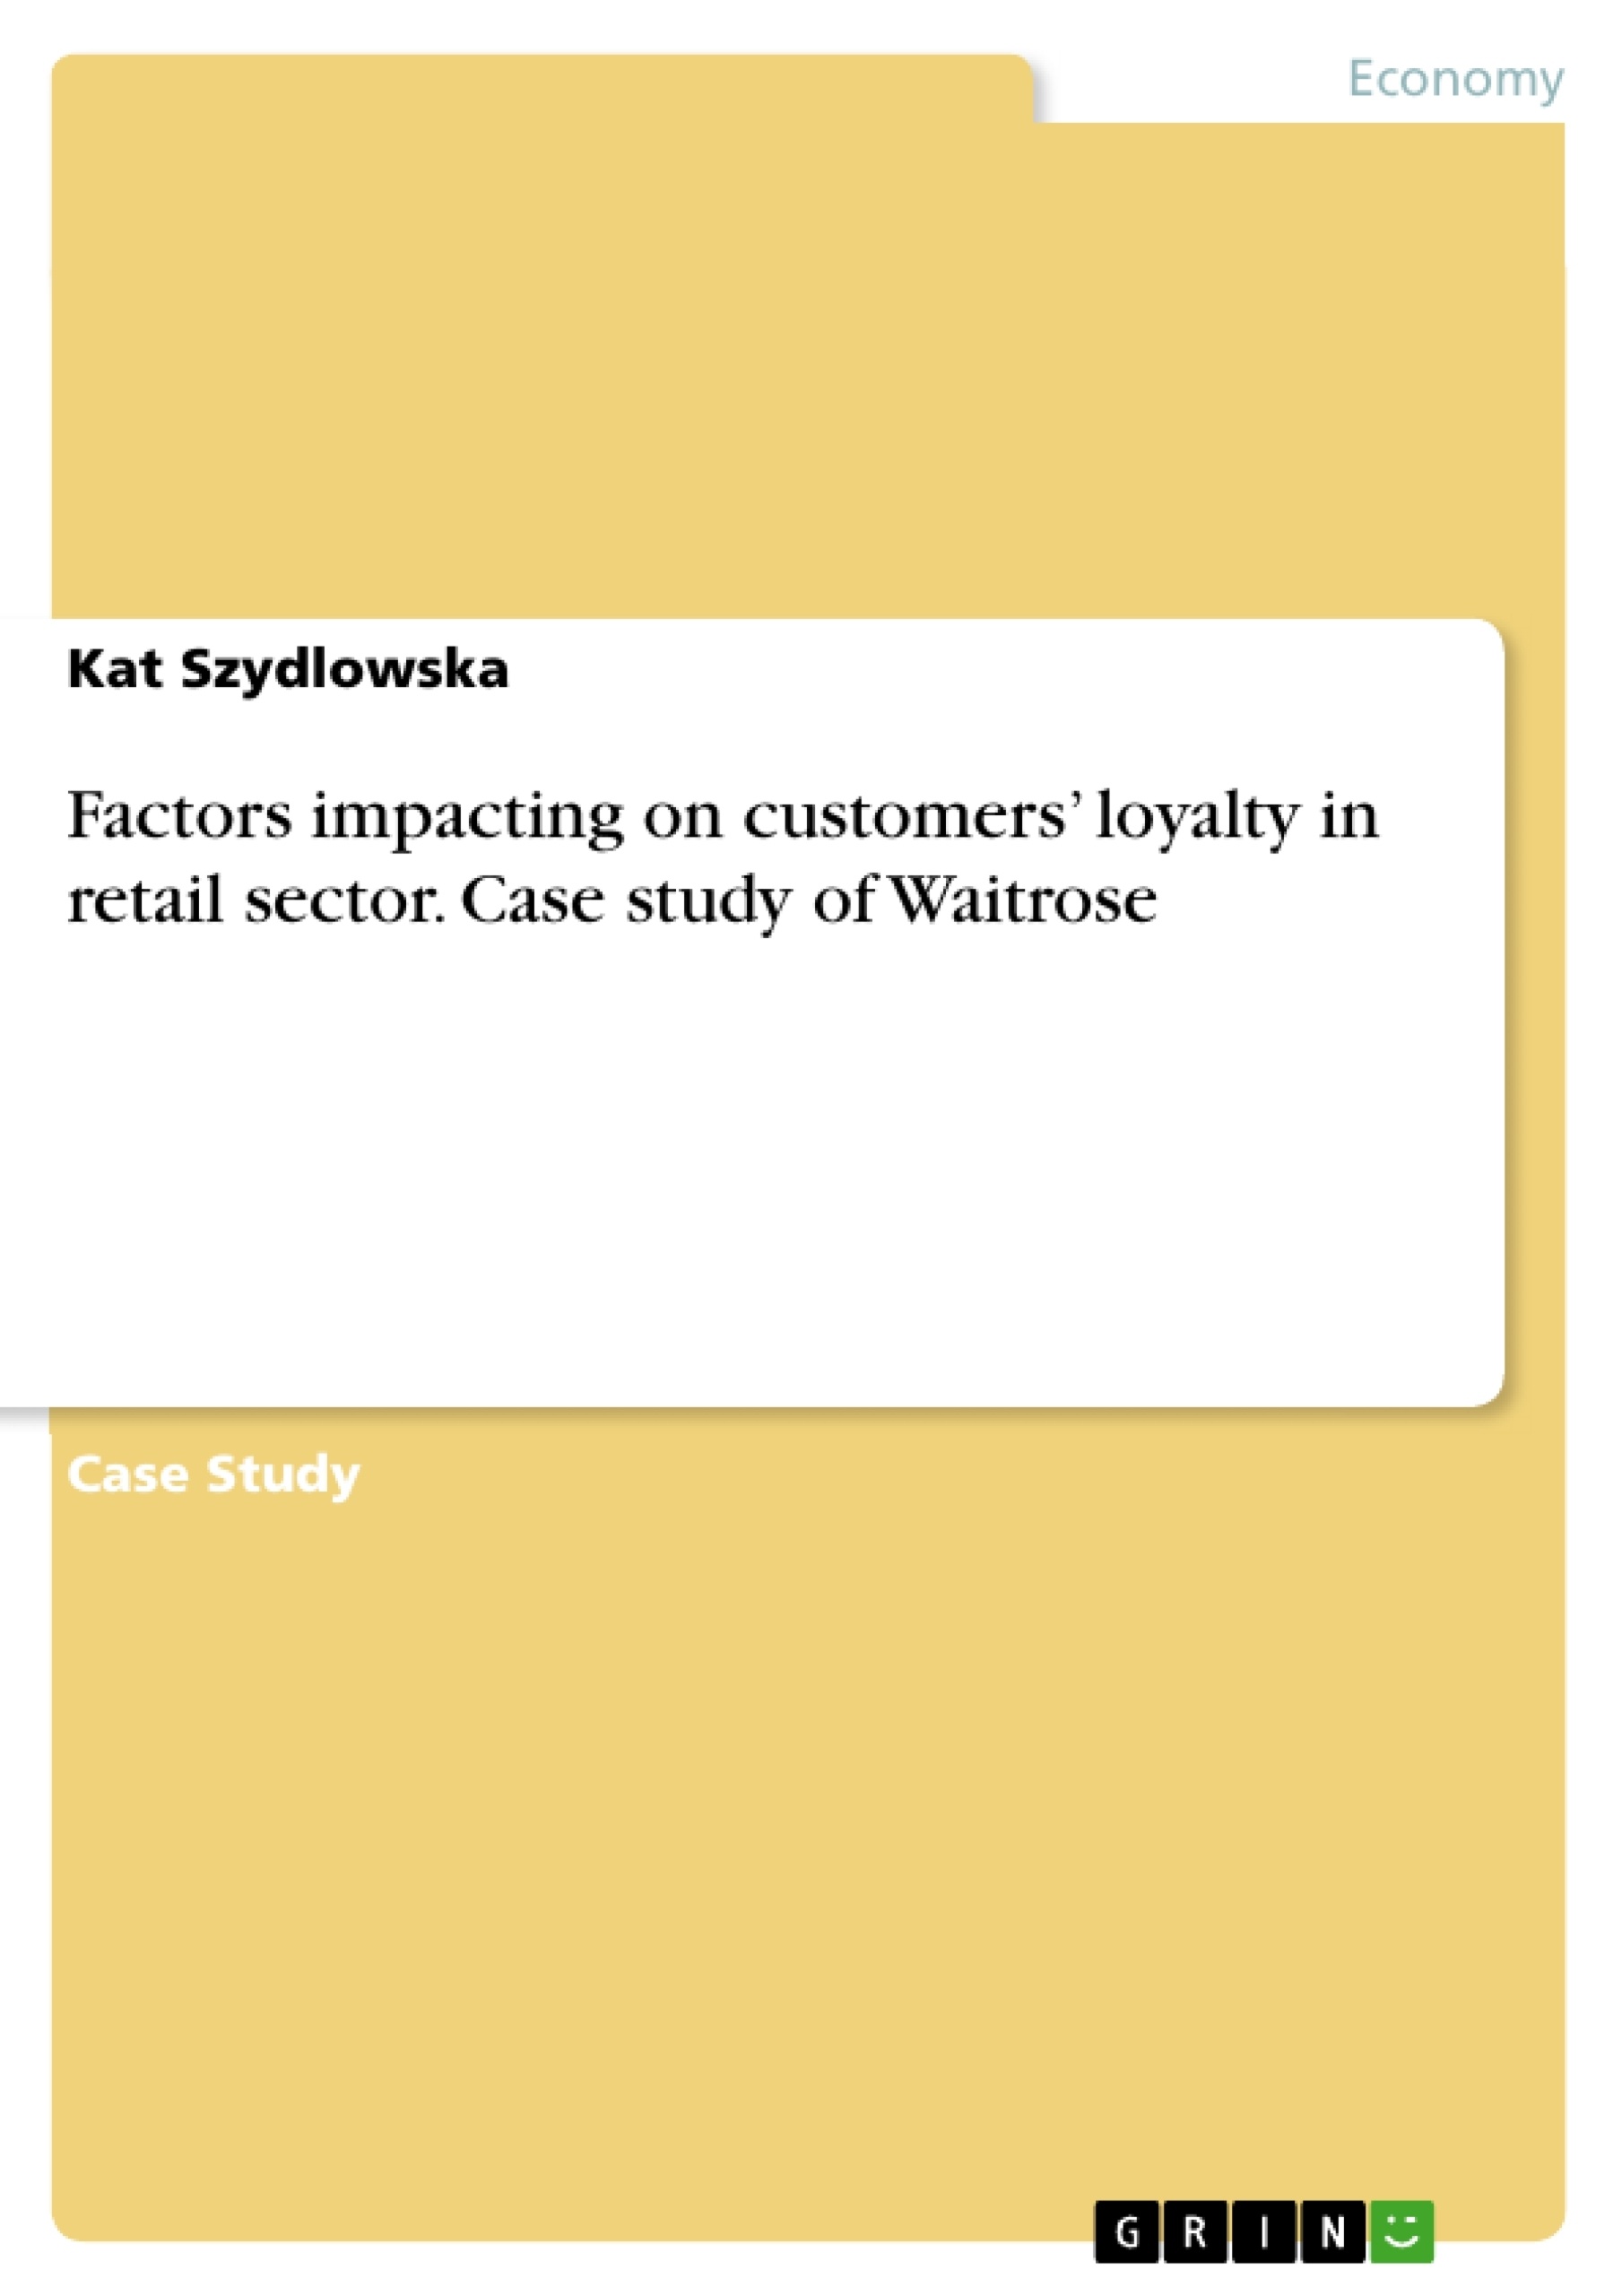 Título: Factors impacting on customers’ loyalty in retail sector. Case study of Waitrose